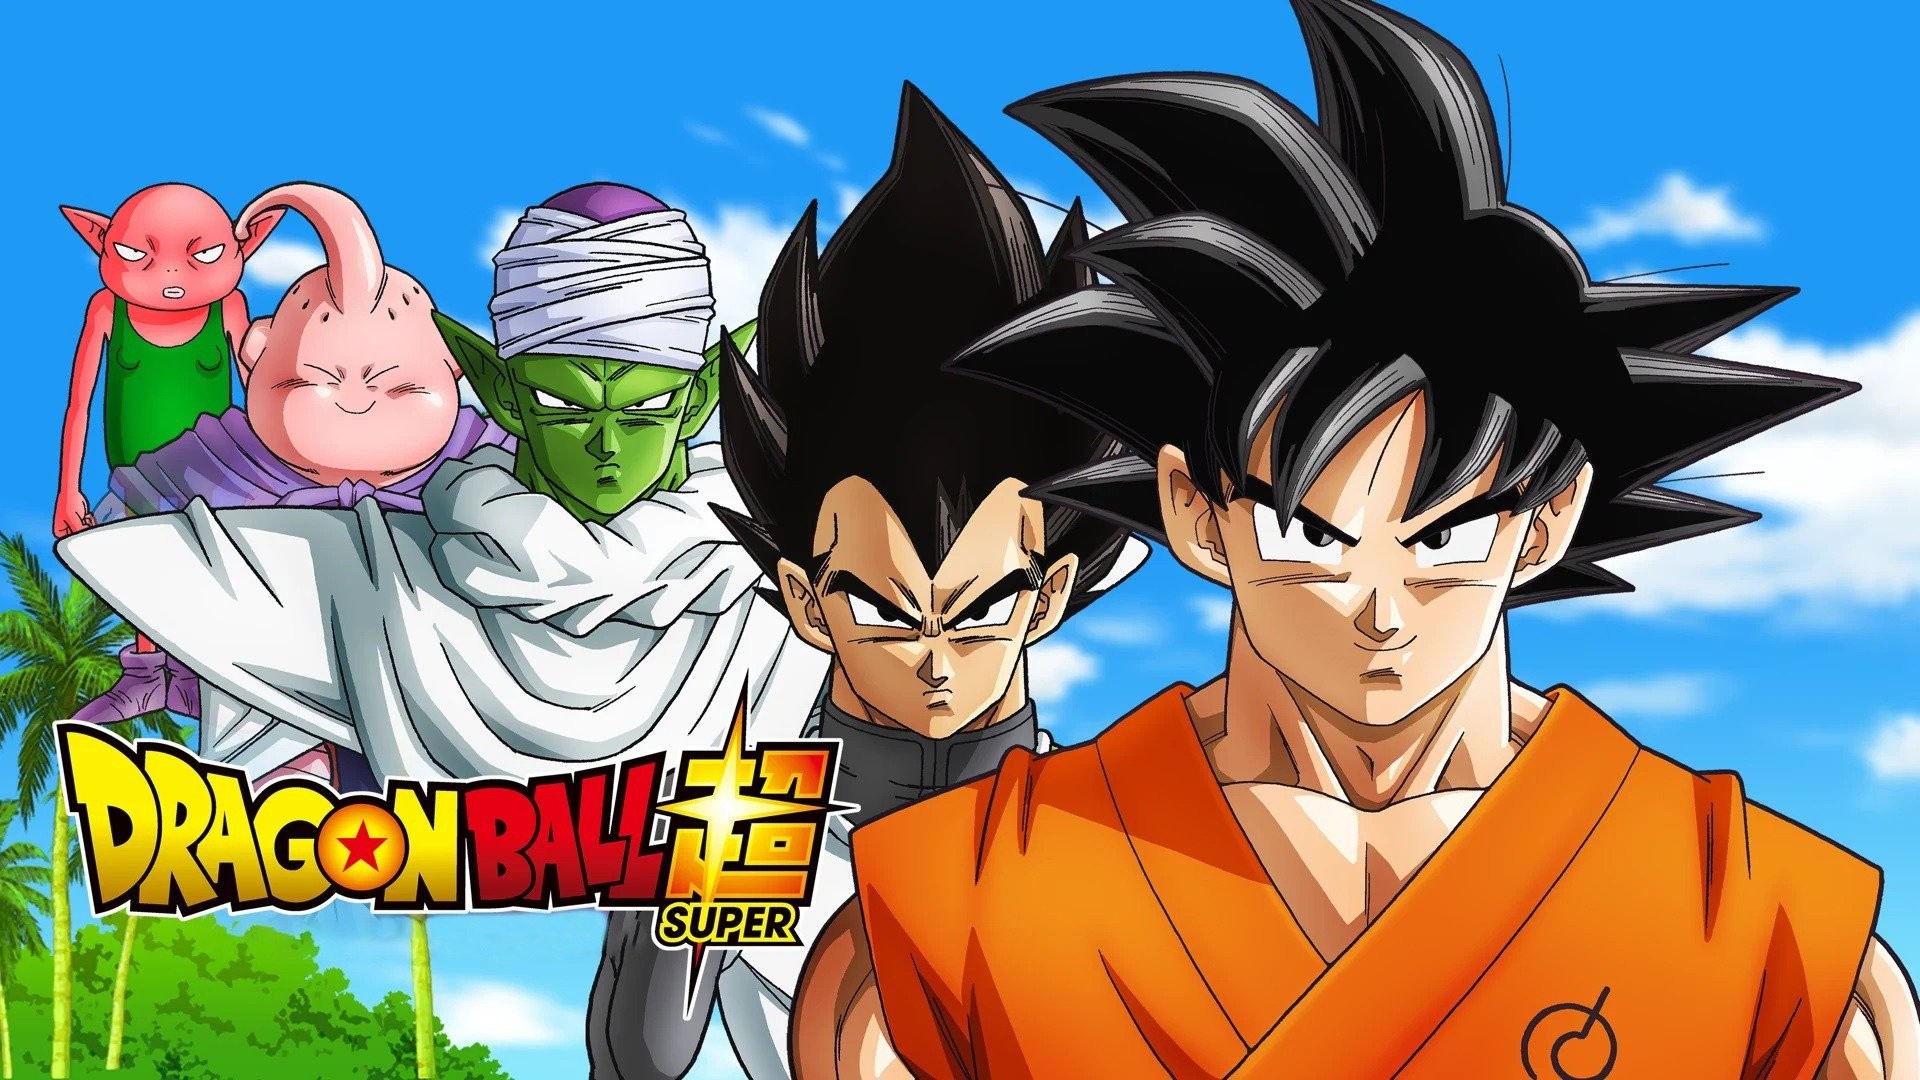 Watch Dragon Ball Super Episode 2 Online - To the Promised Resort! Vegeta  Goes on a Family Trip?!